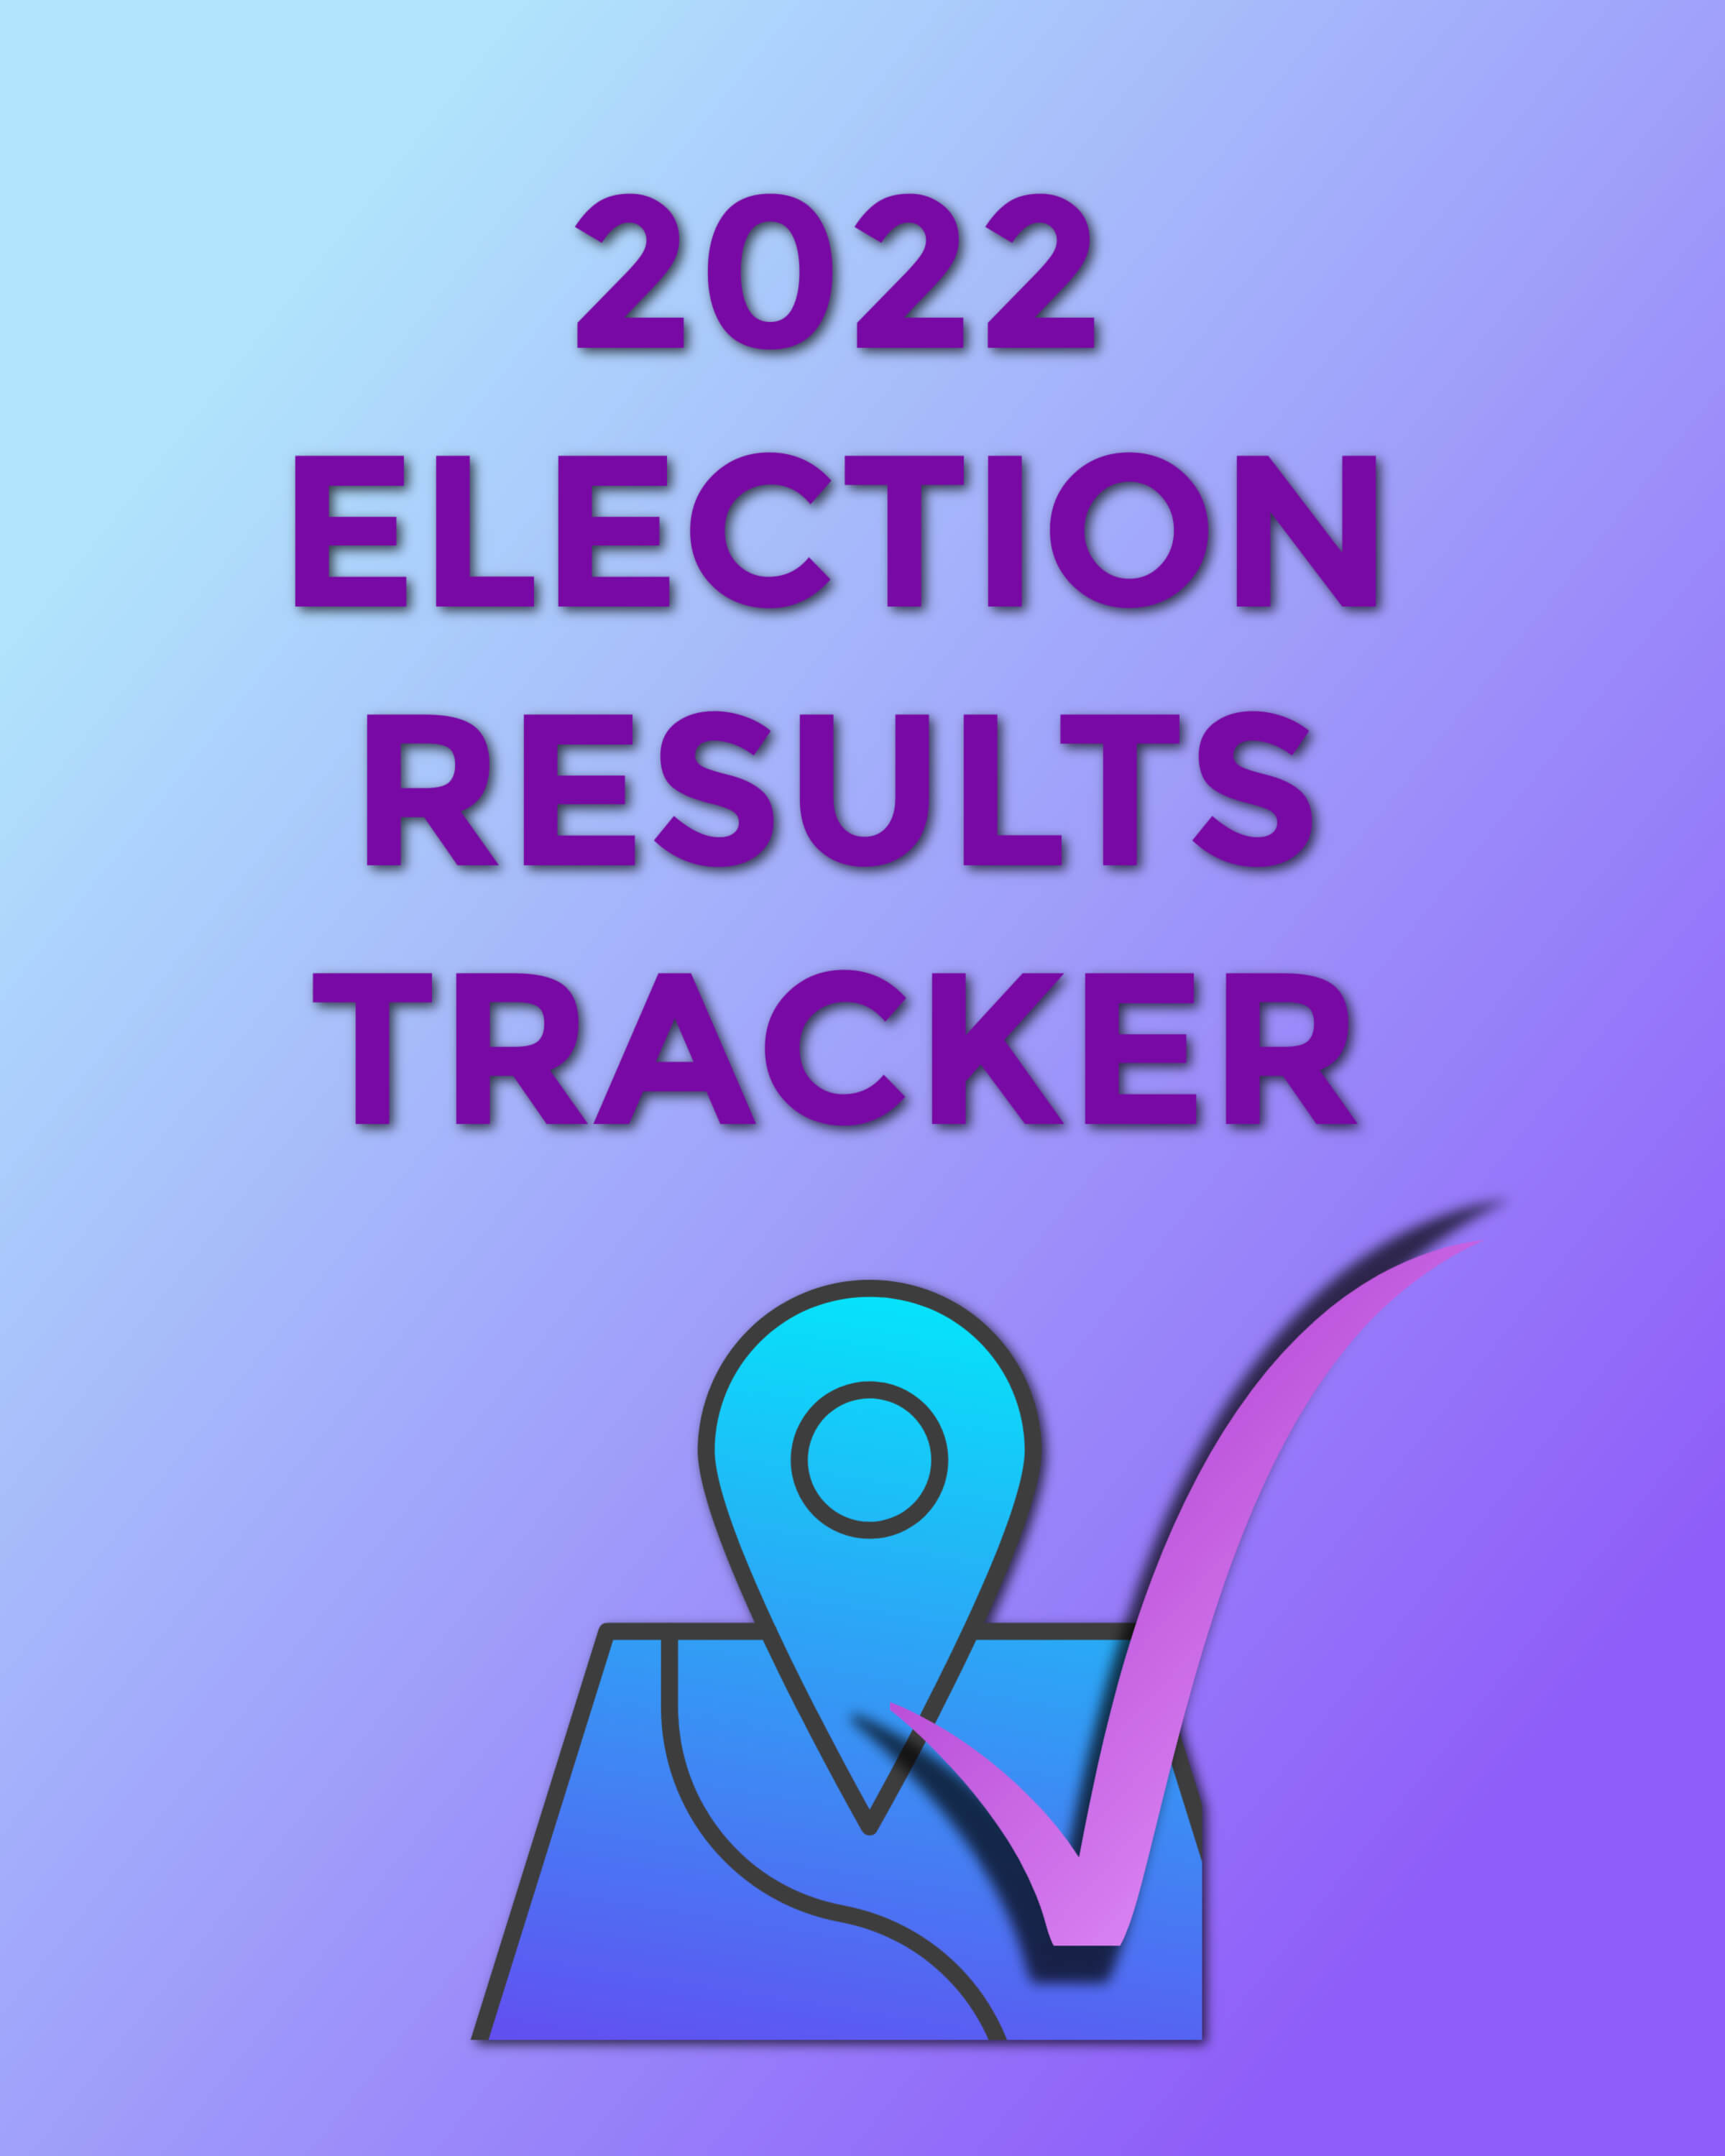 Election Tracker